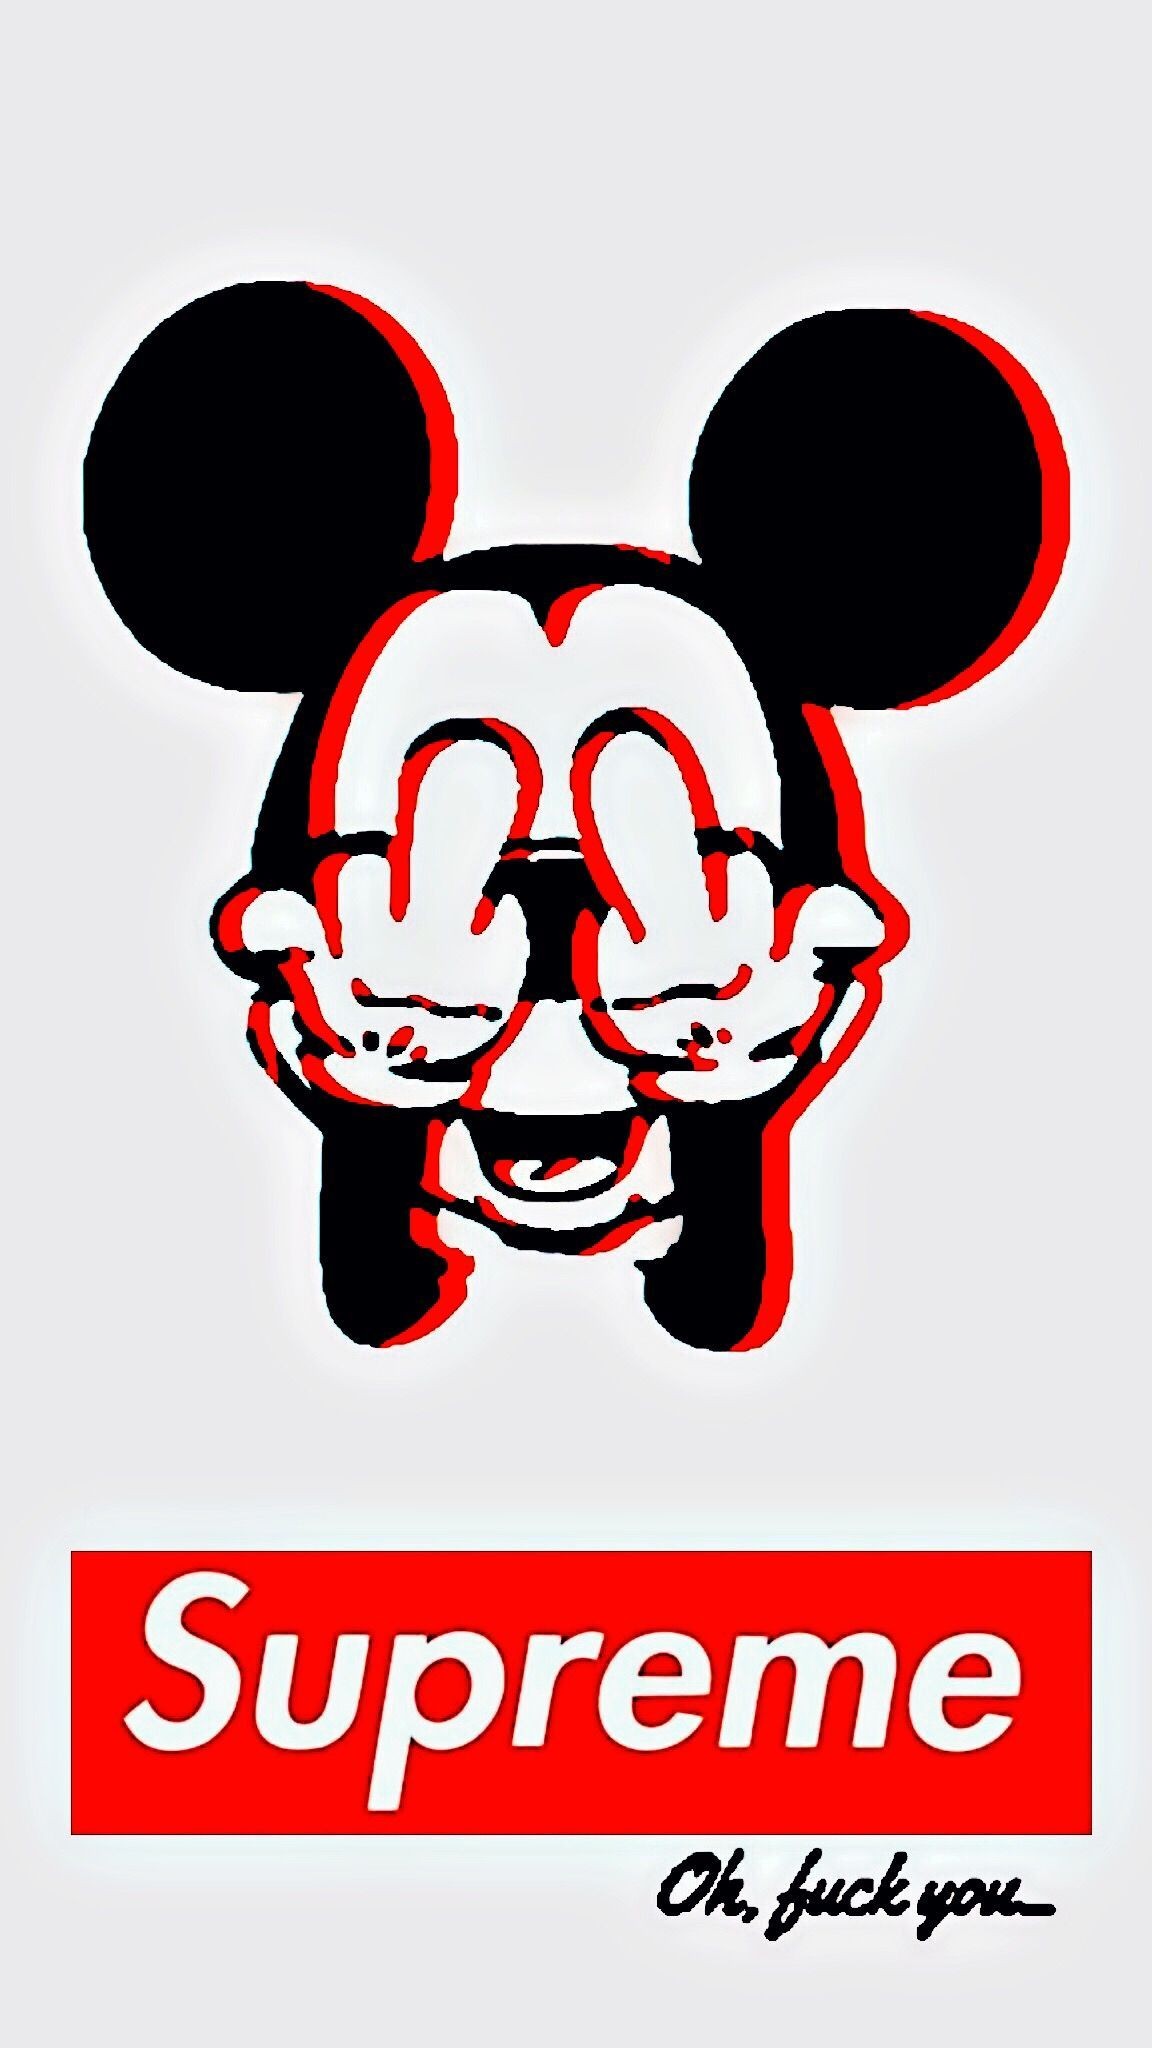 Fuck Off Mouse iPhone Wallpaper Awesome Middle Finger Art